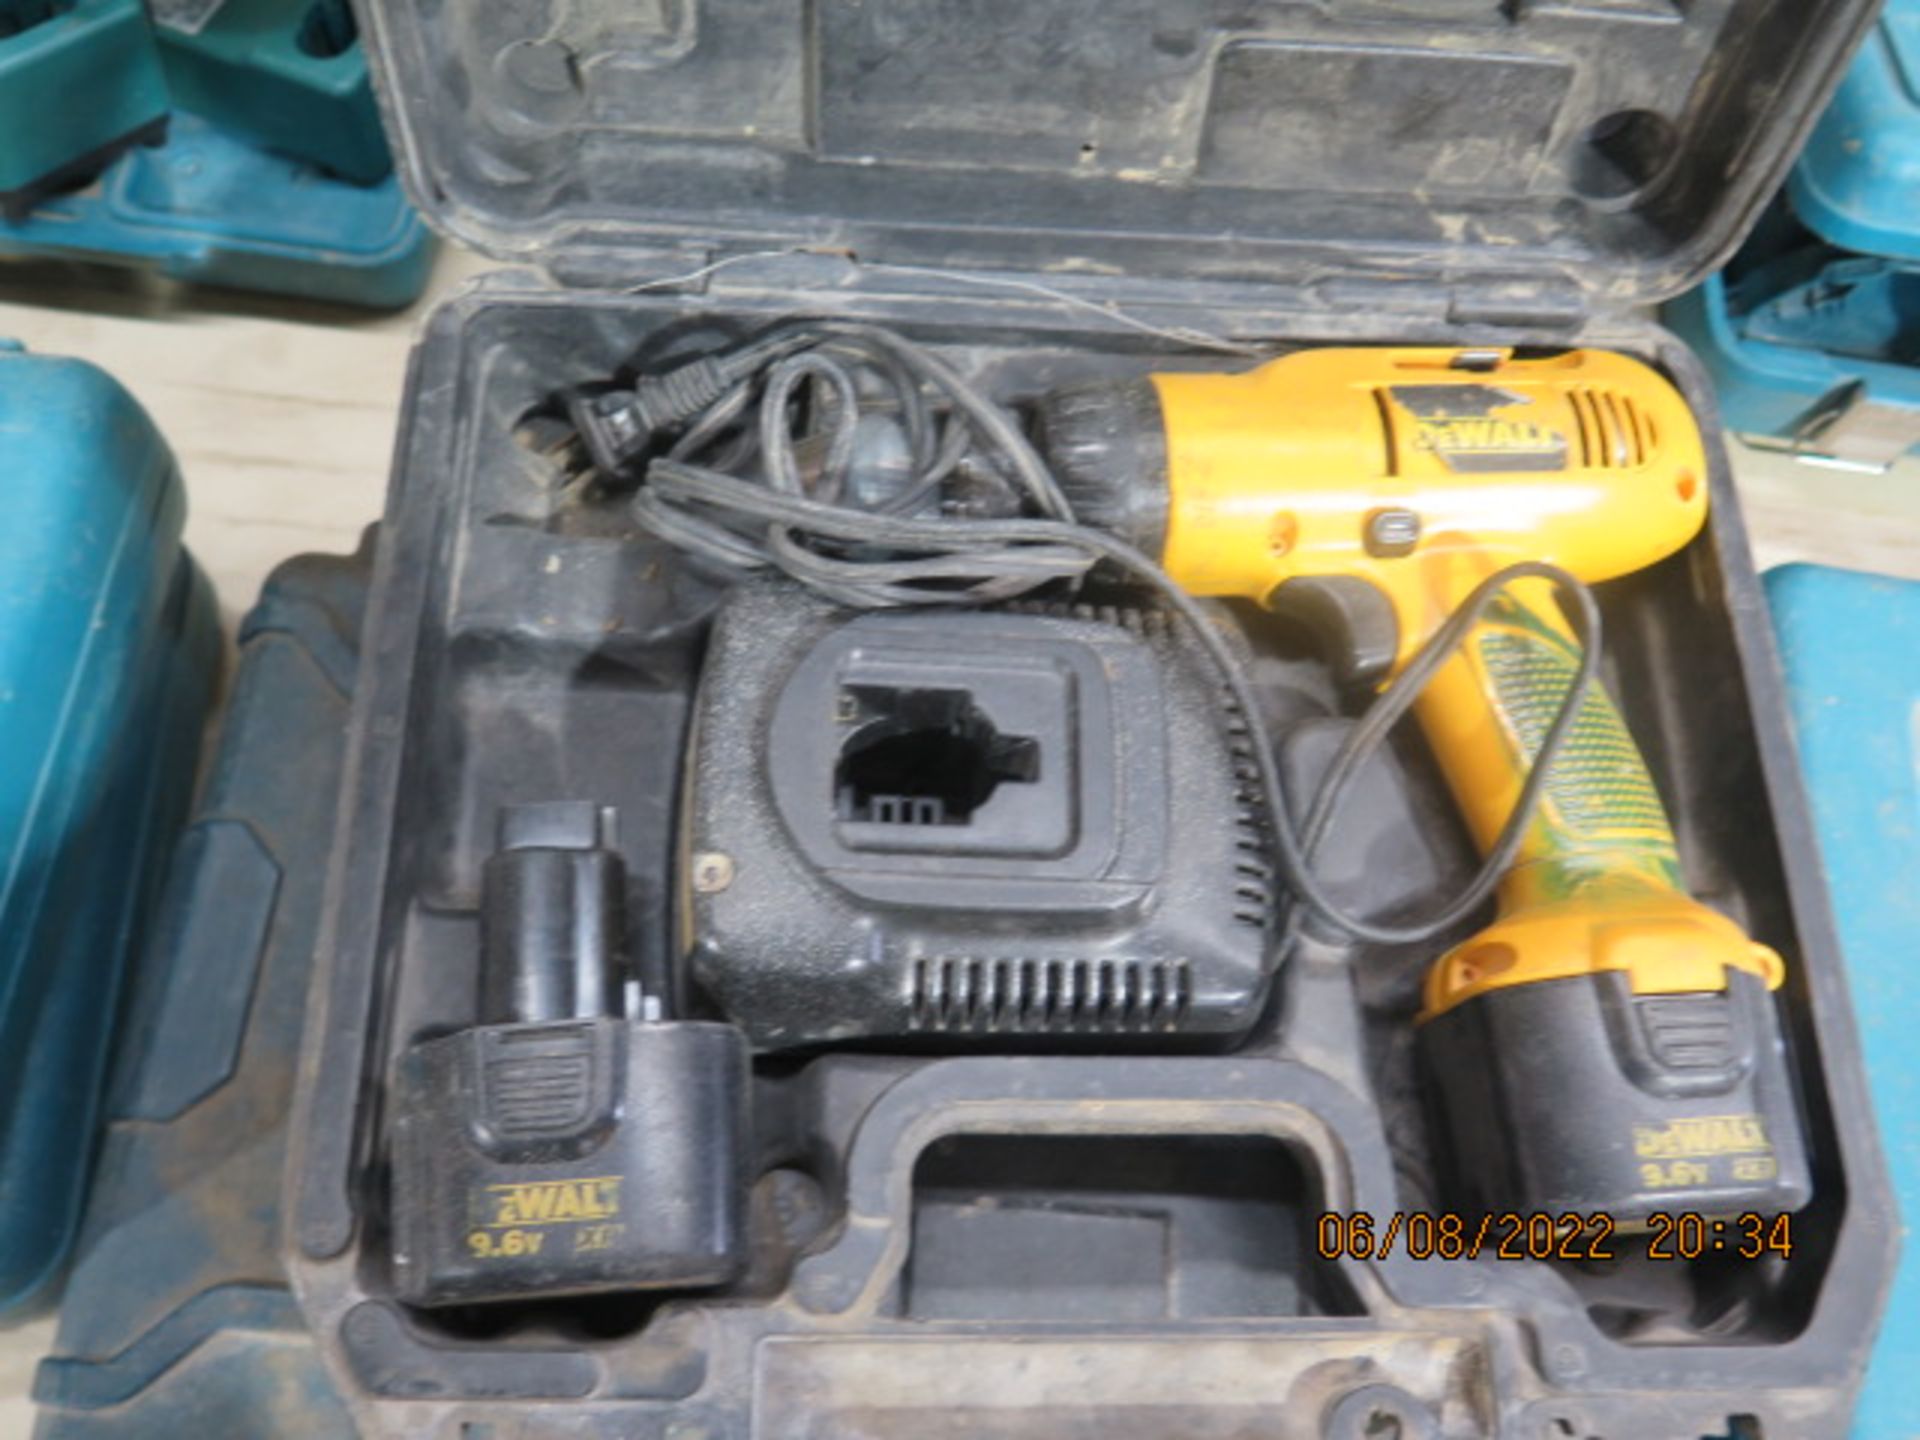 DeWalt 12 Volt Drill w/ Charger, DeWalt 9.6 Volt Drill w/ Charger and Bosch 18 Vold Drill (NO - Image 2 of 4